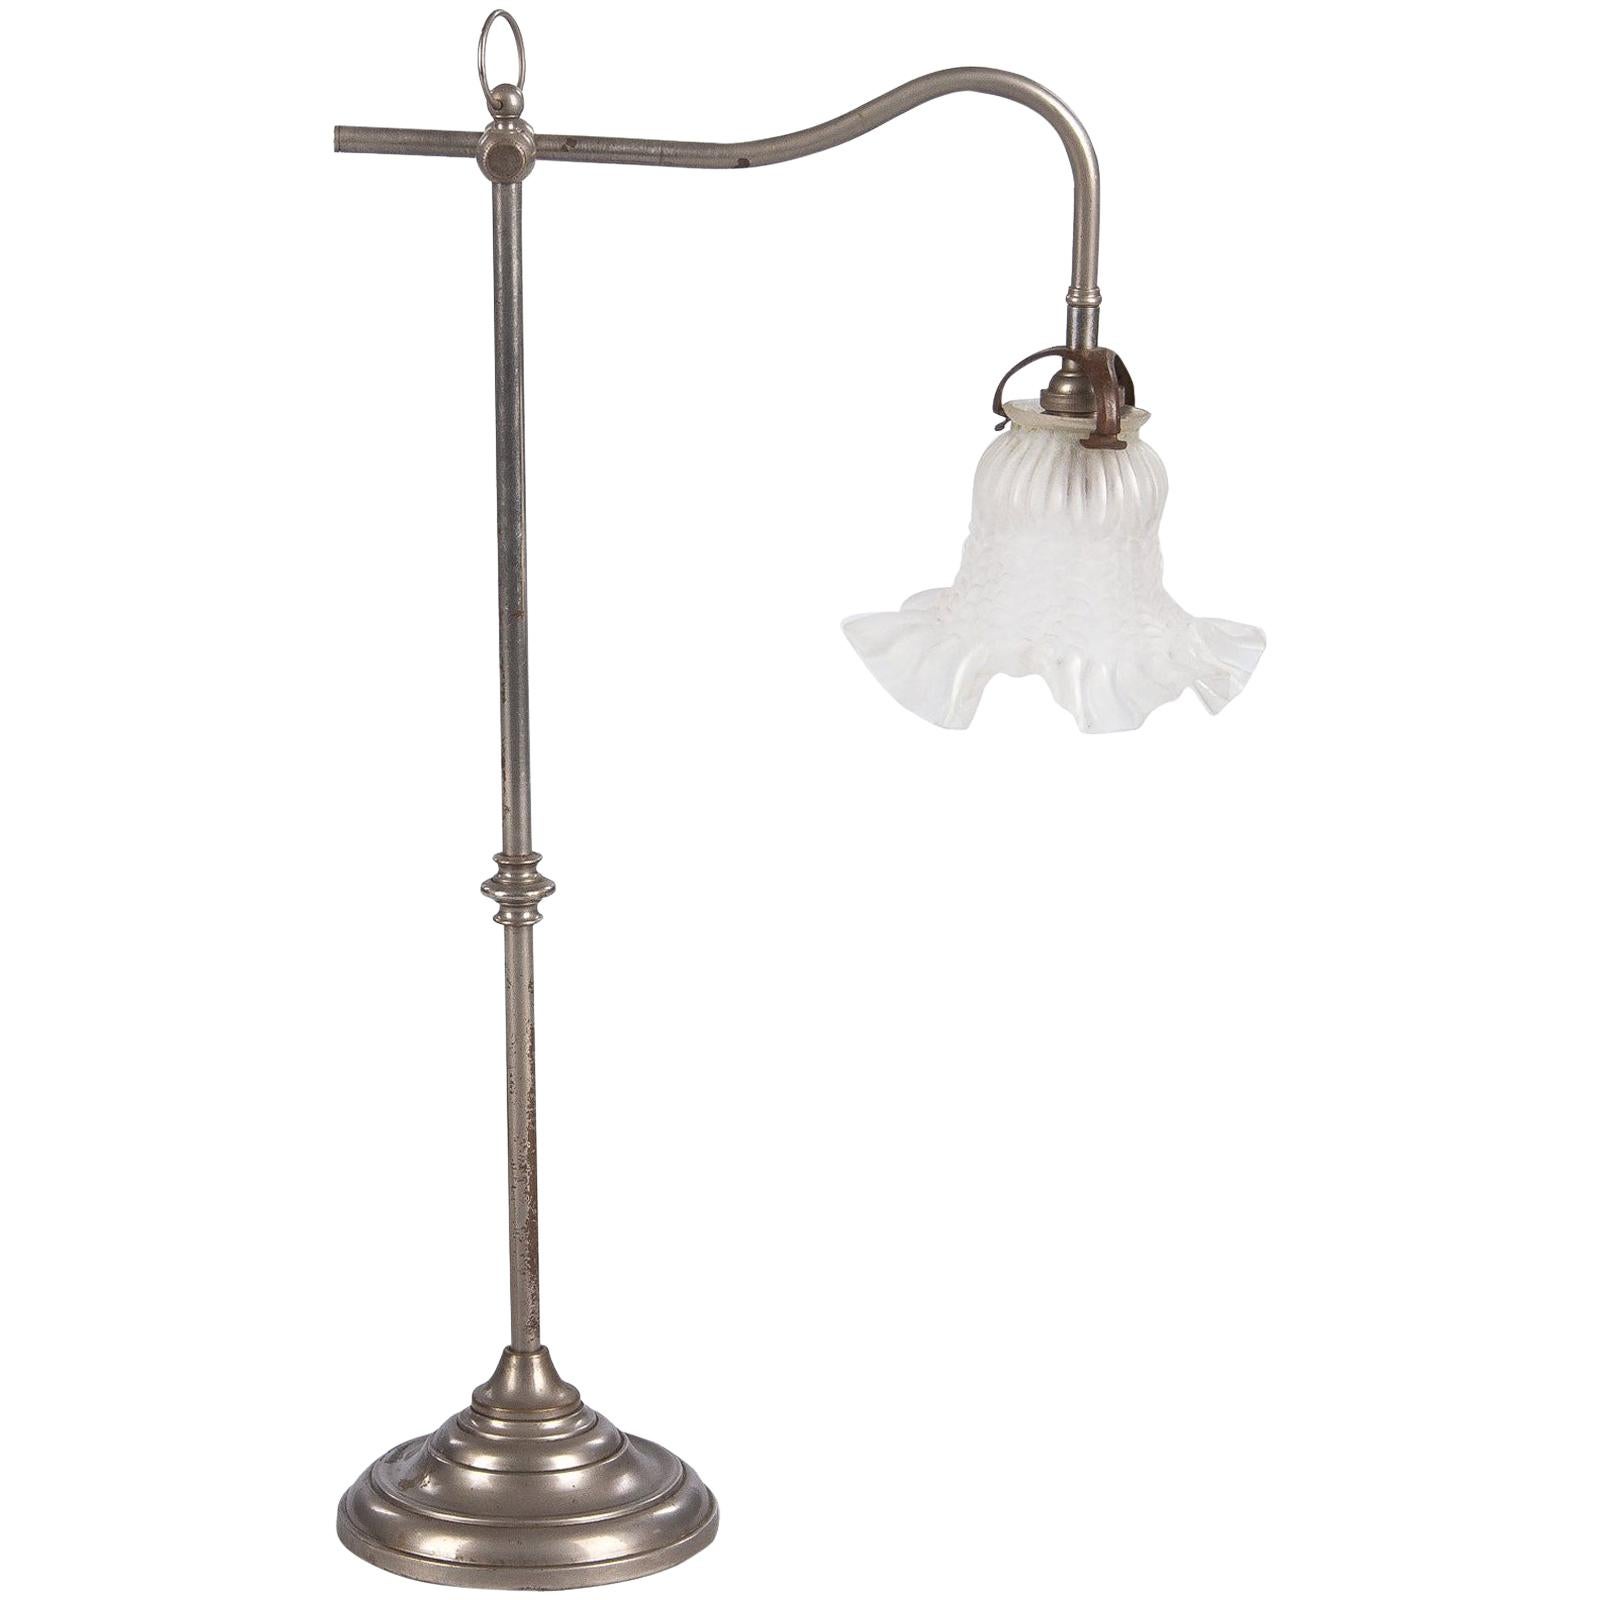 French Art Deco Silver Metal Desk Lamp with Glass Shade, 1930s